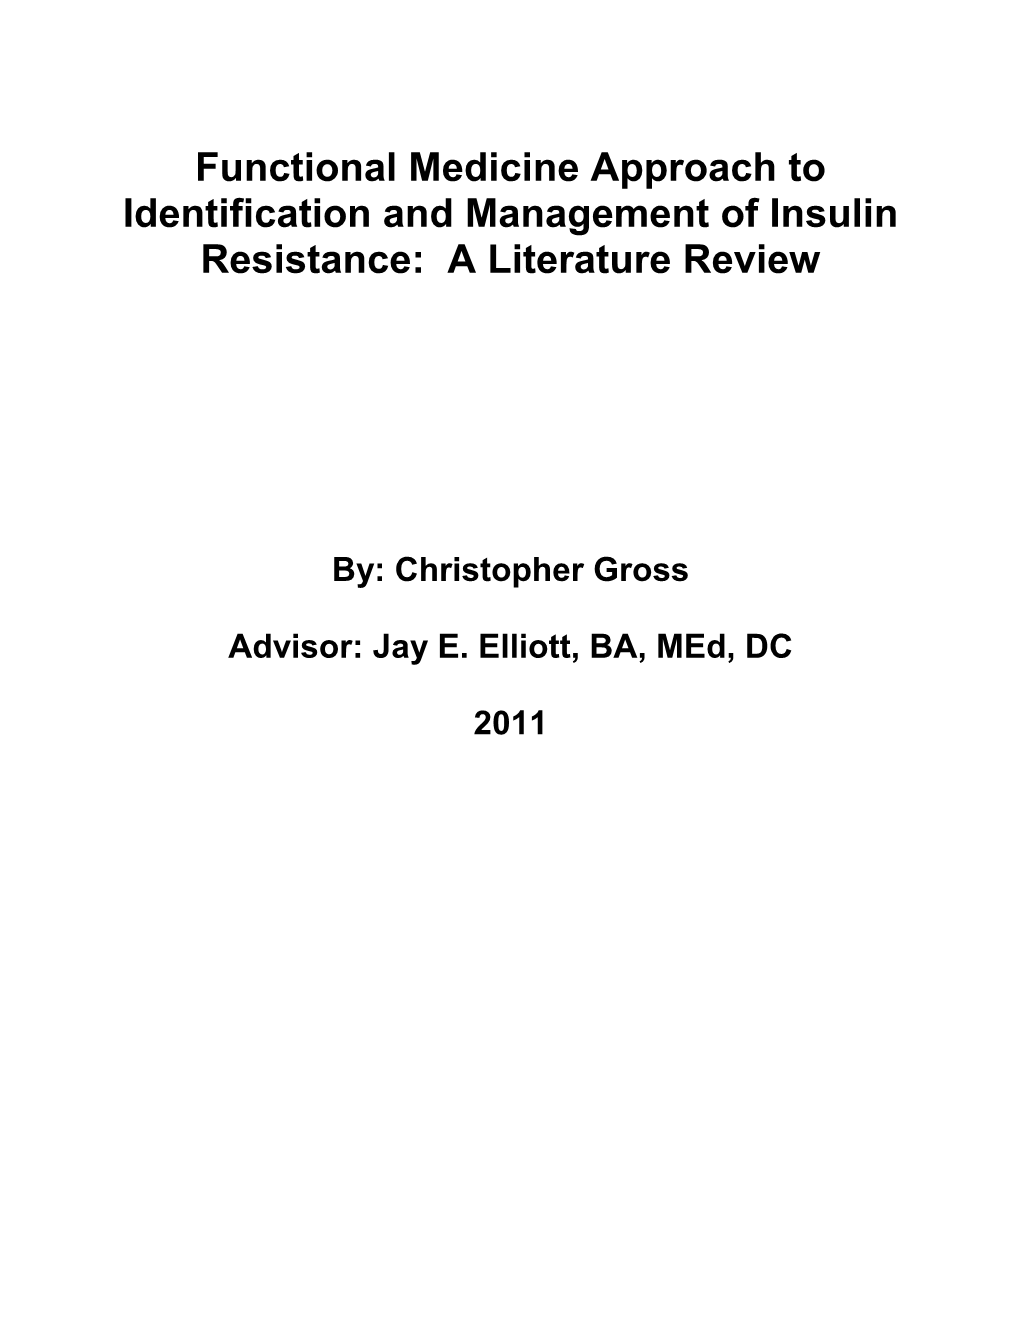 Functional Medicine Approach to Identification and Management of Insulin Resistance: a Literature Review